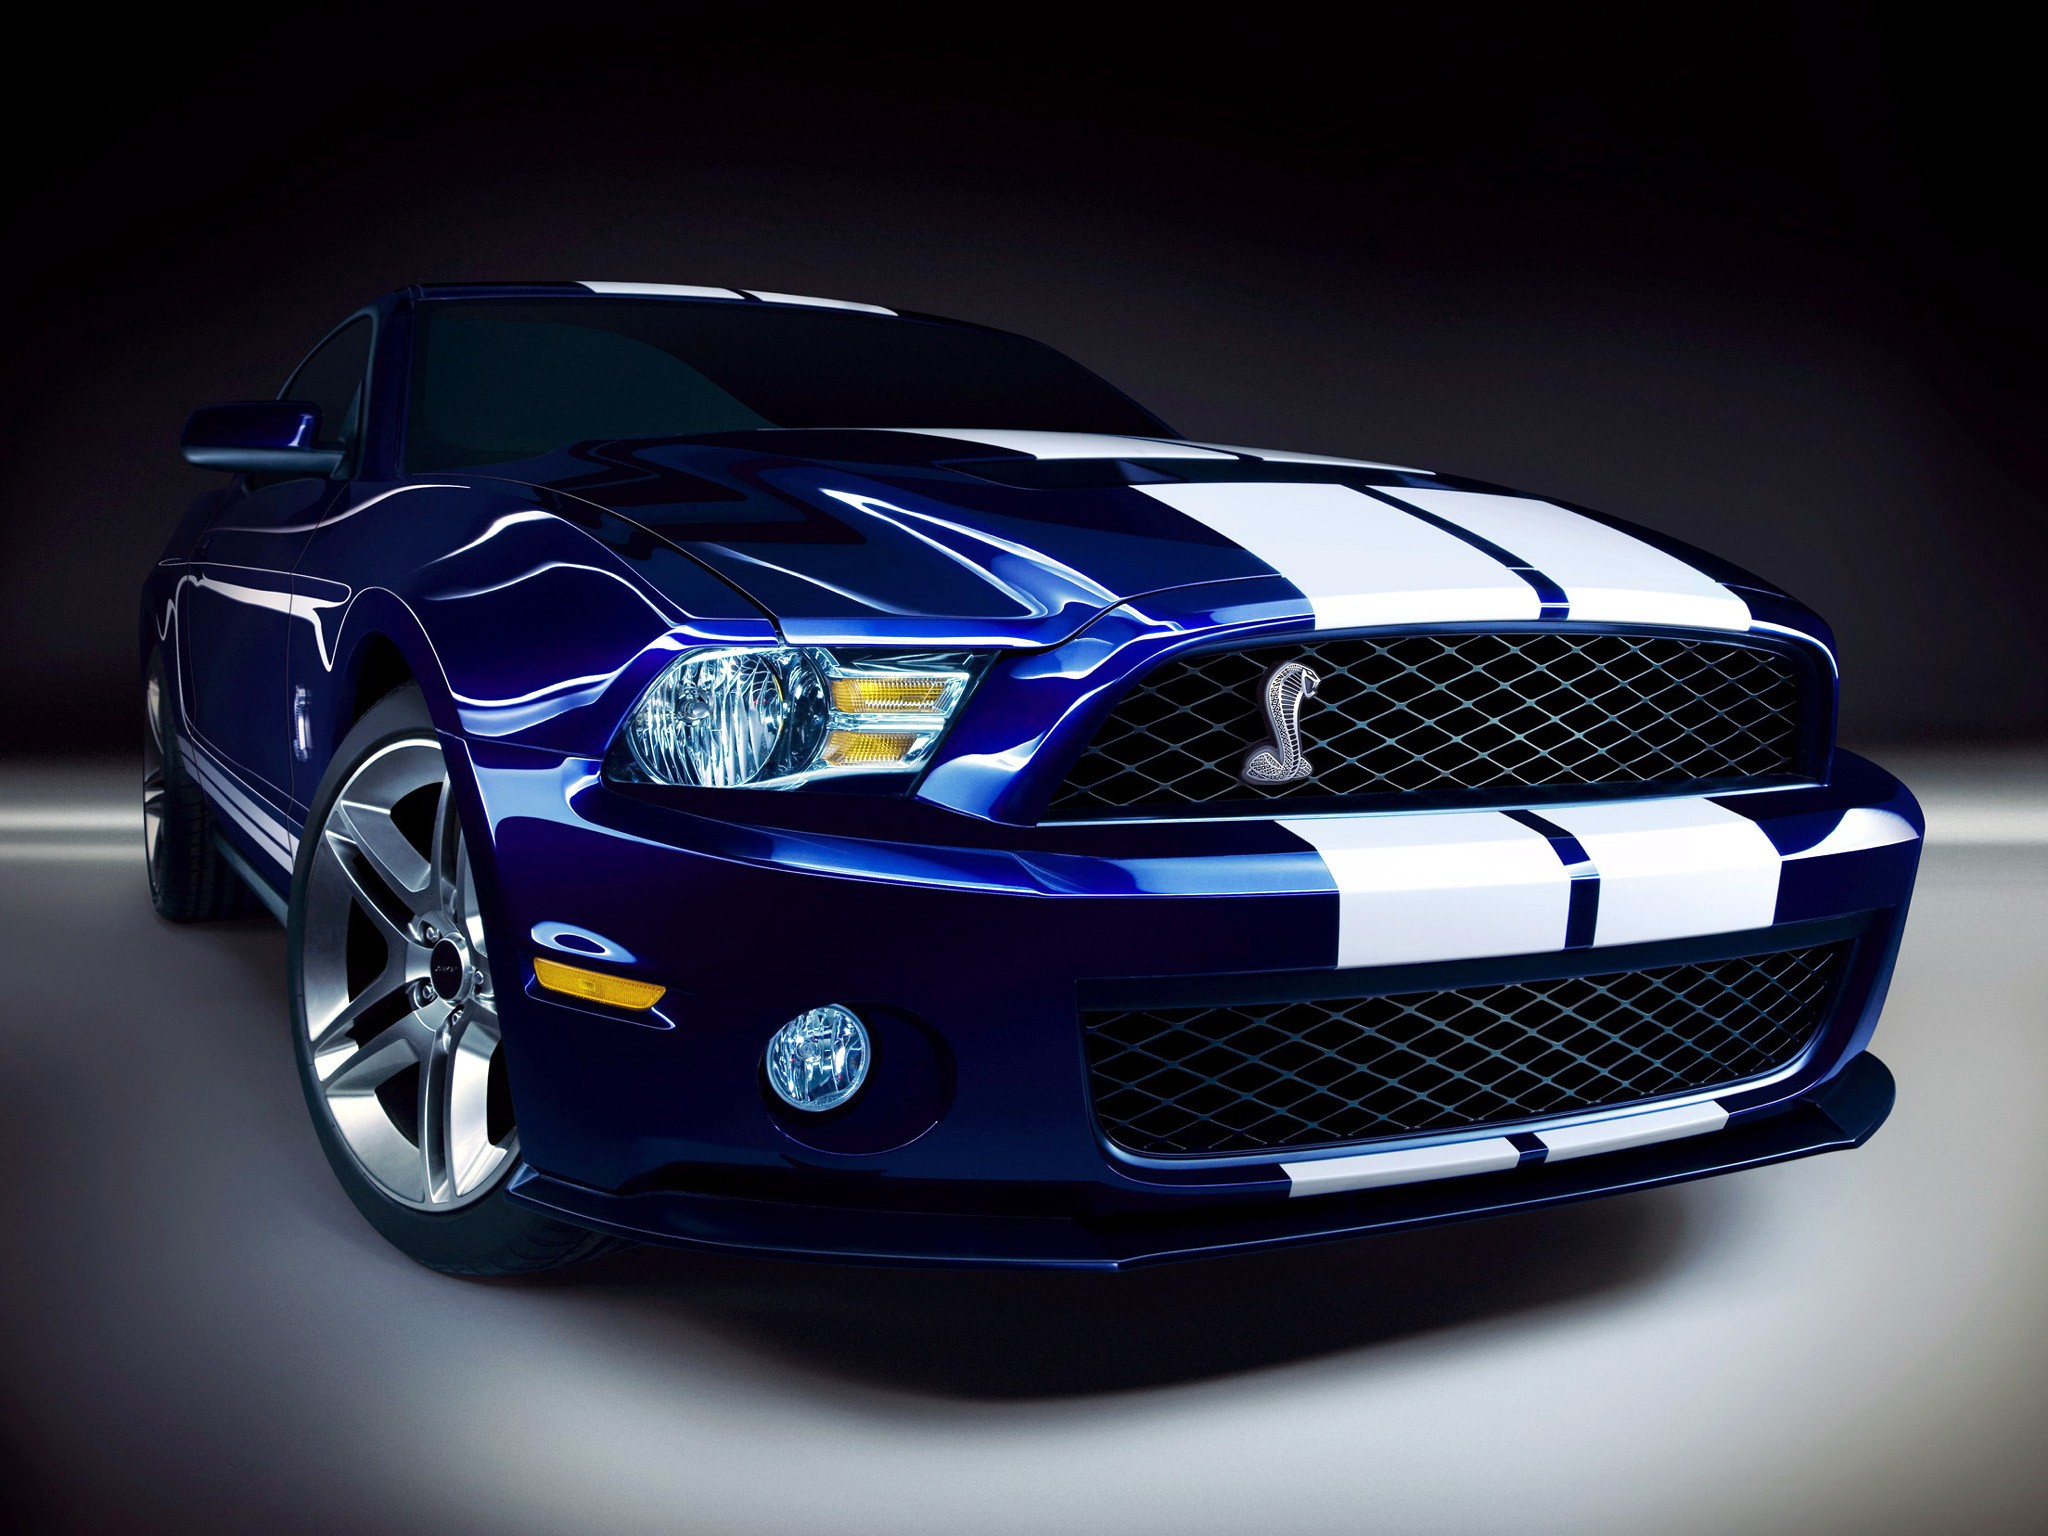 Ford Shelby Backgrounds, Compatible - PC, Mobile, Gadgets| 2048x1536 px